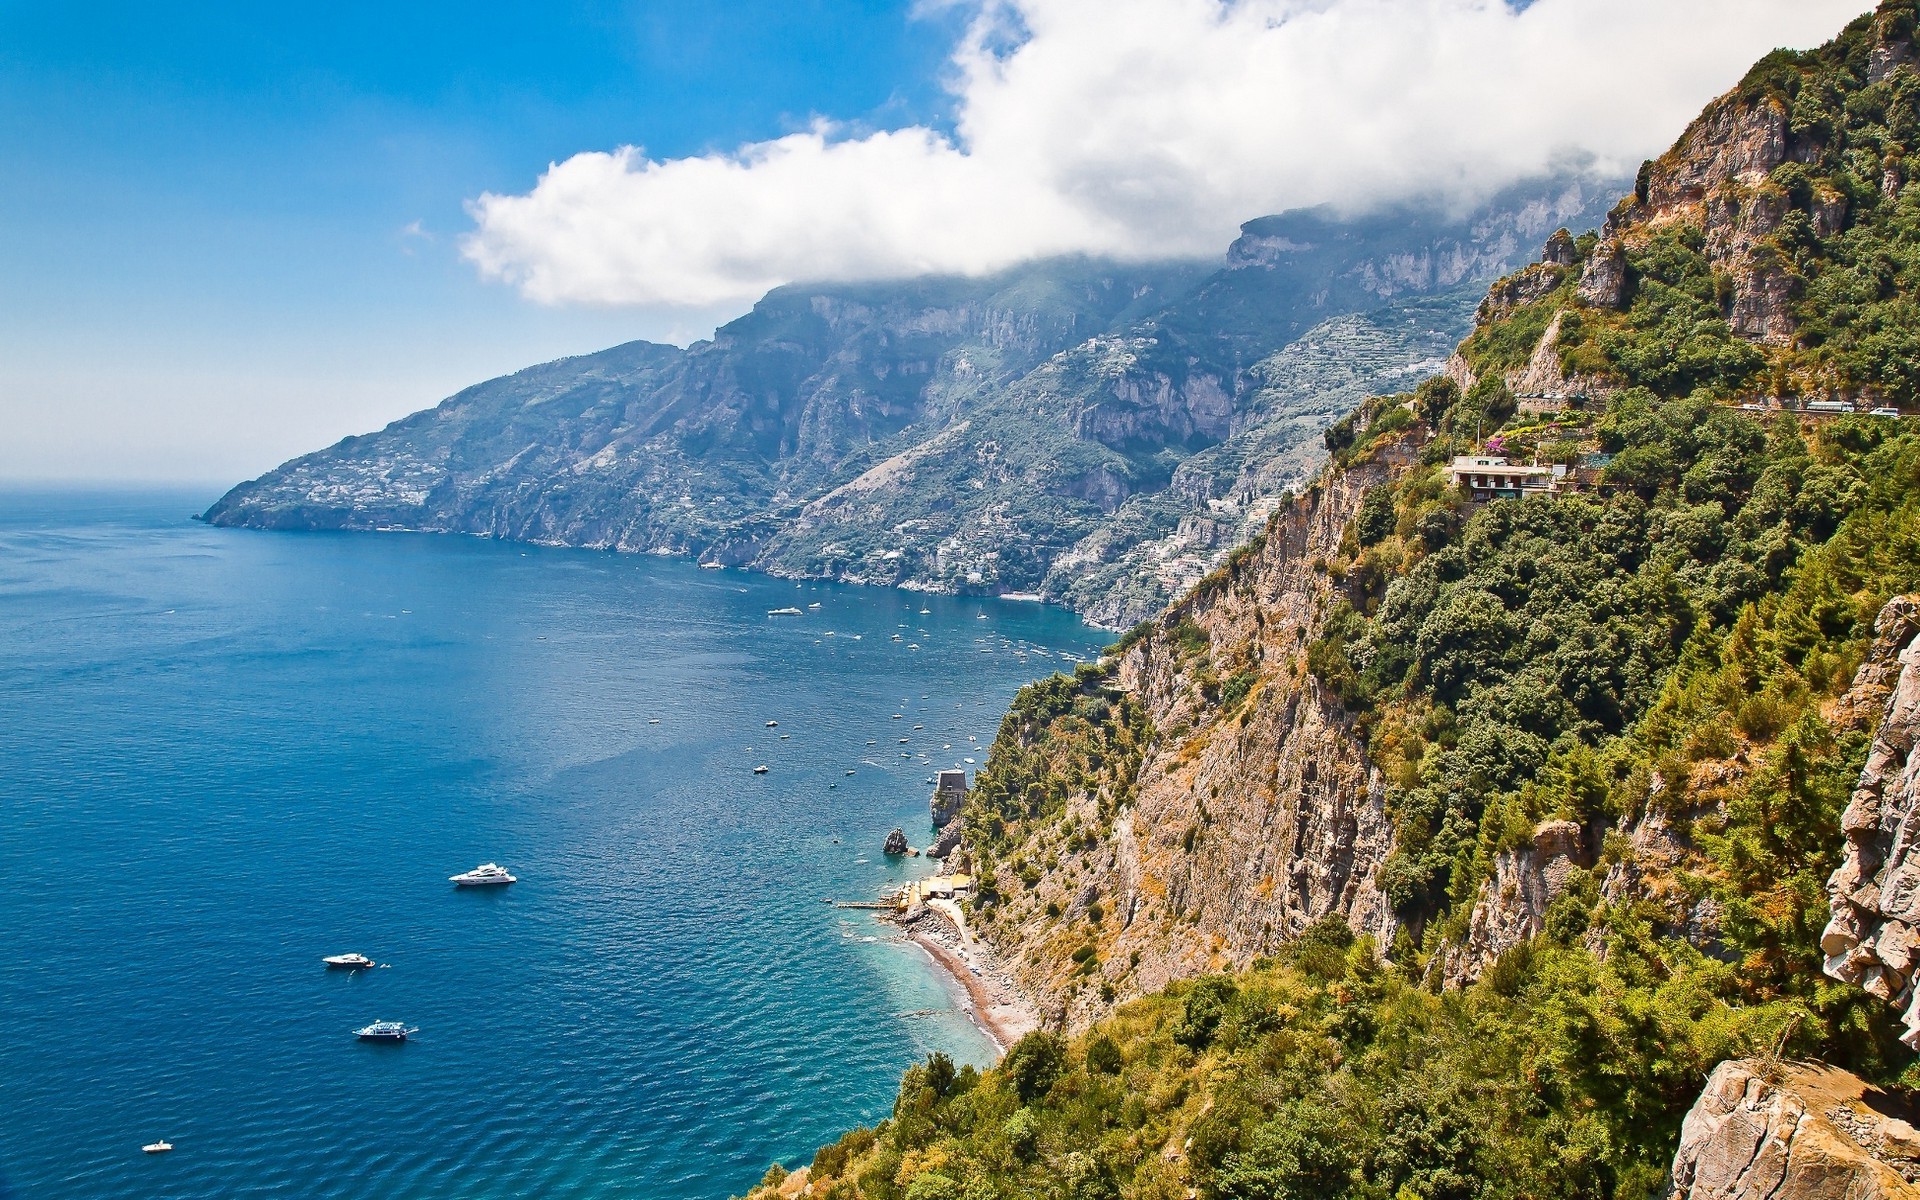 sea, Coast, Italy, Nature, Landscape, Shrubs, Mountain, Cliff, Blue, Water, House, Yachts, Beach, Clouds, Summer Wallpaper